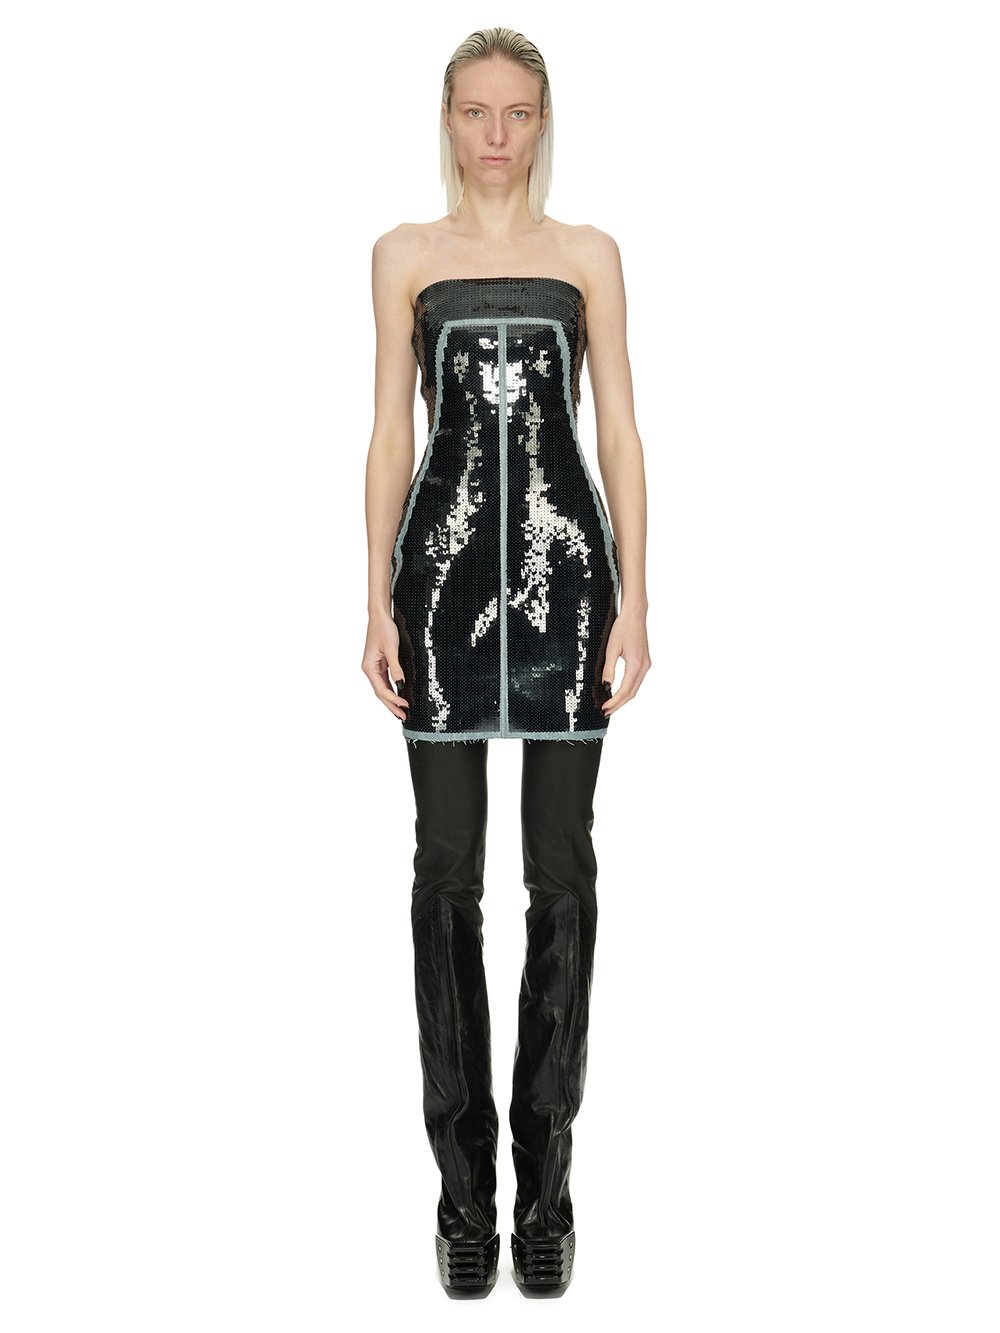 RICK OWENS FW23 LUXOR BUSTIER DRESS IN BLUE AND BLACK SEQUIN EMBROIDERED STRETCH DENIM 